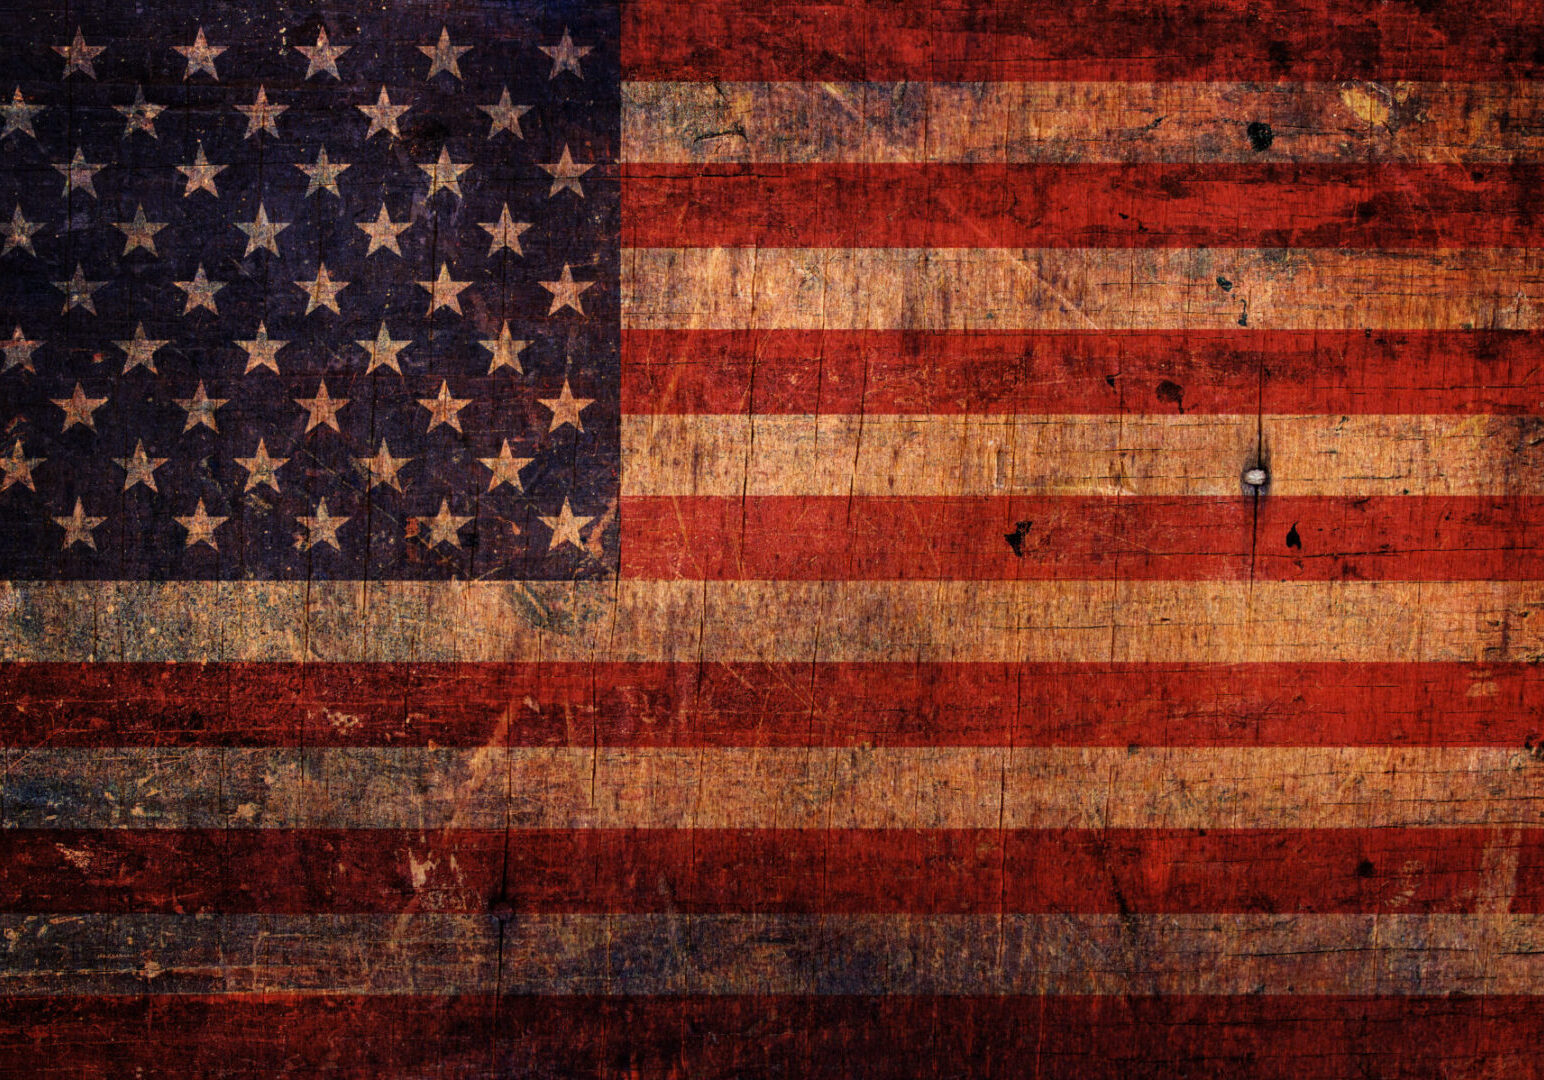 An old and vintage grunge American flag background.